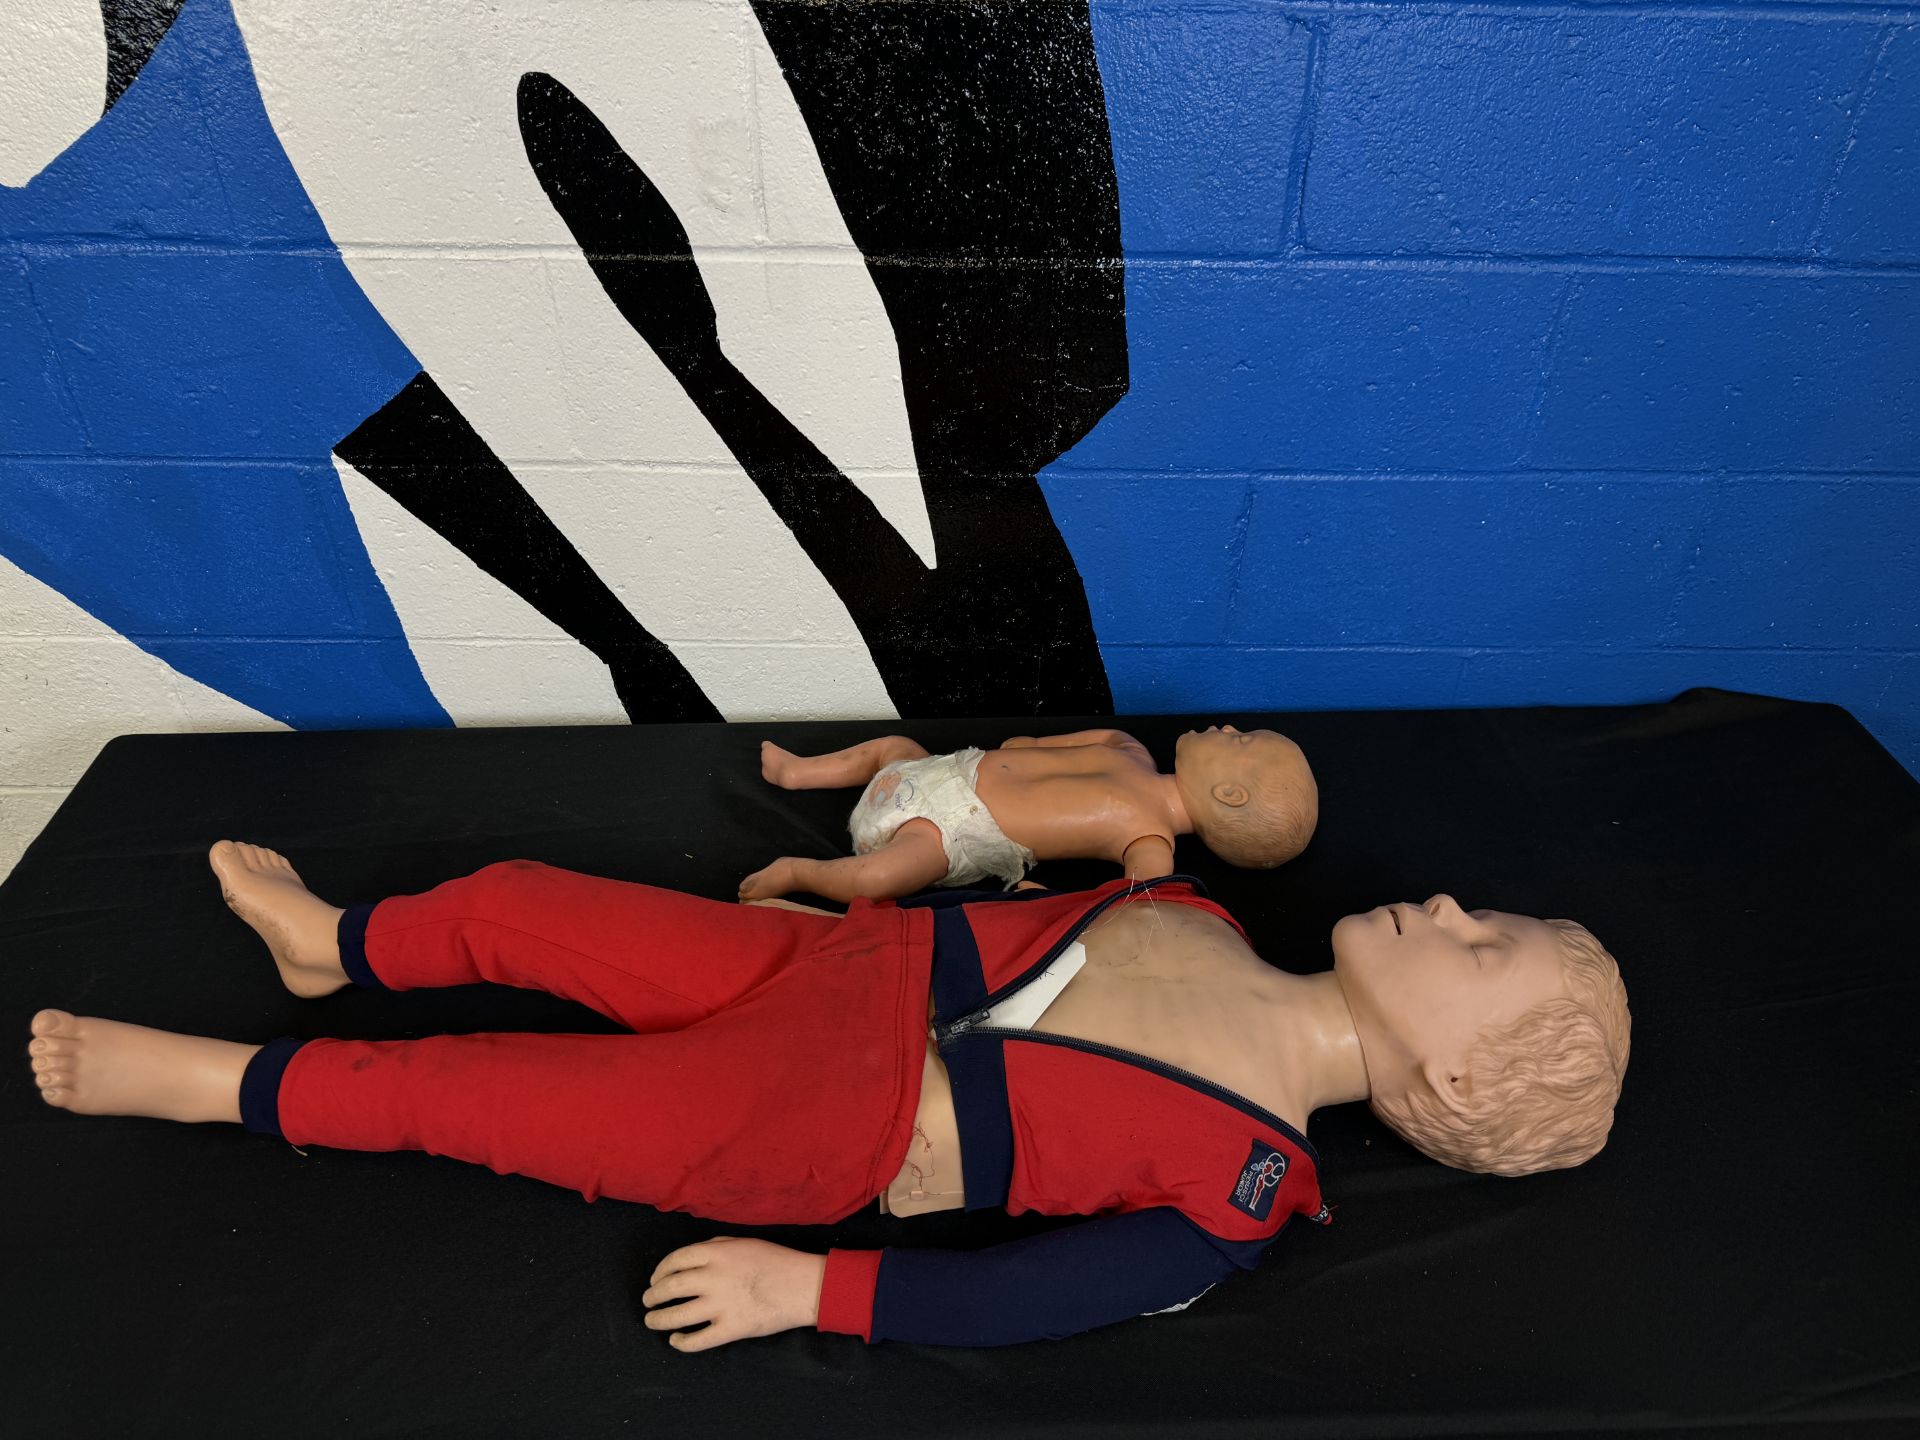 Pediatric and Infant CPR Crisis Dummy w/ Case - Image 3 of 3